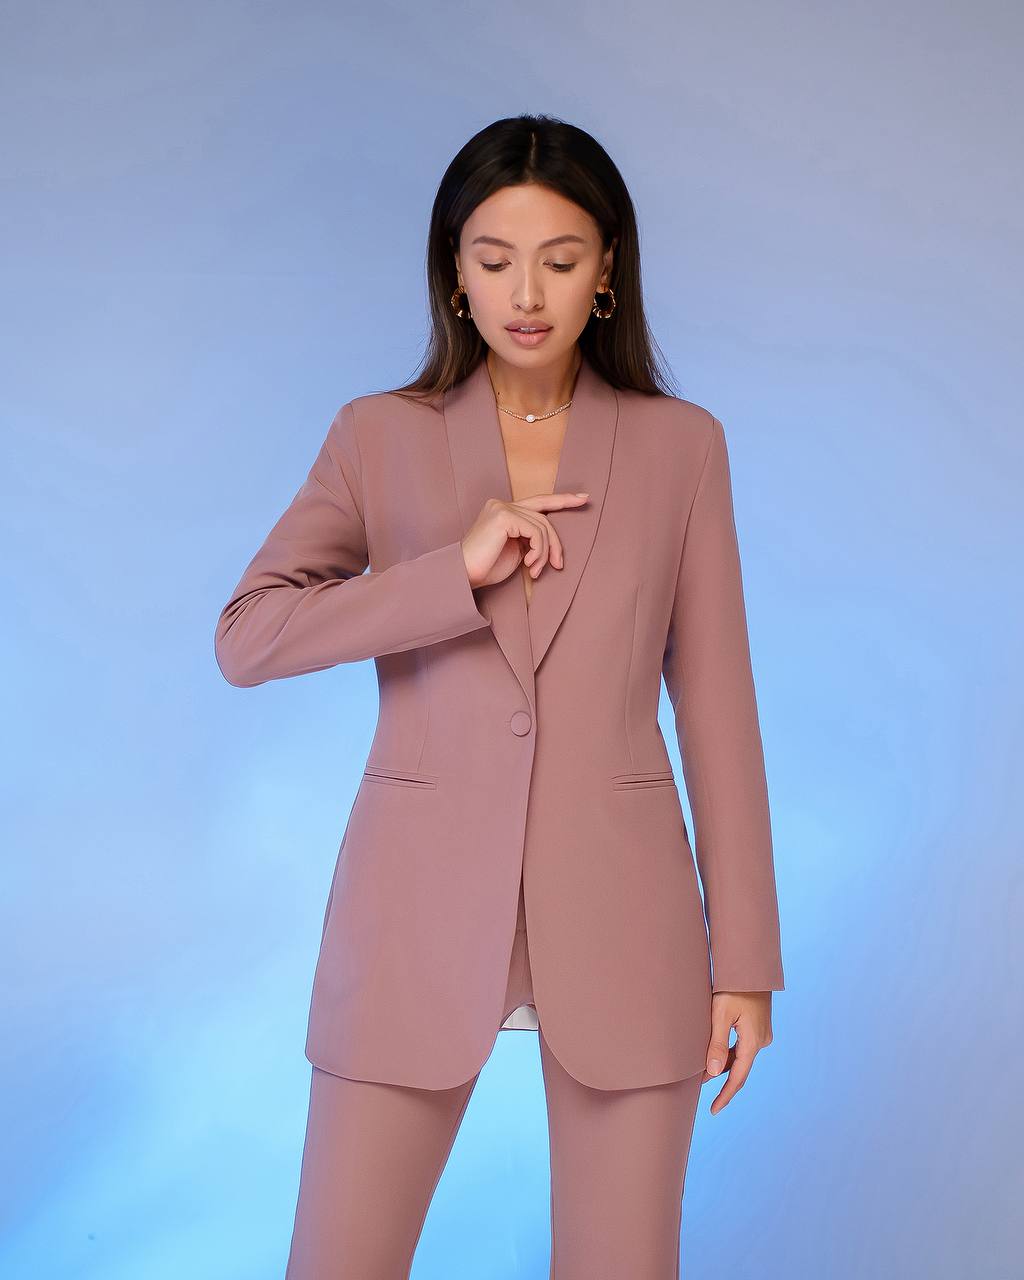 a woman in a pink suit posing for a picture